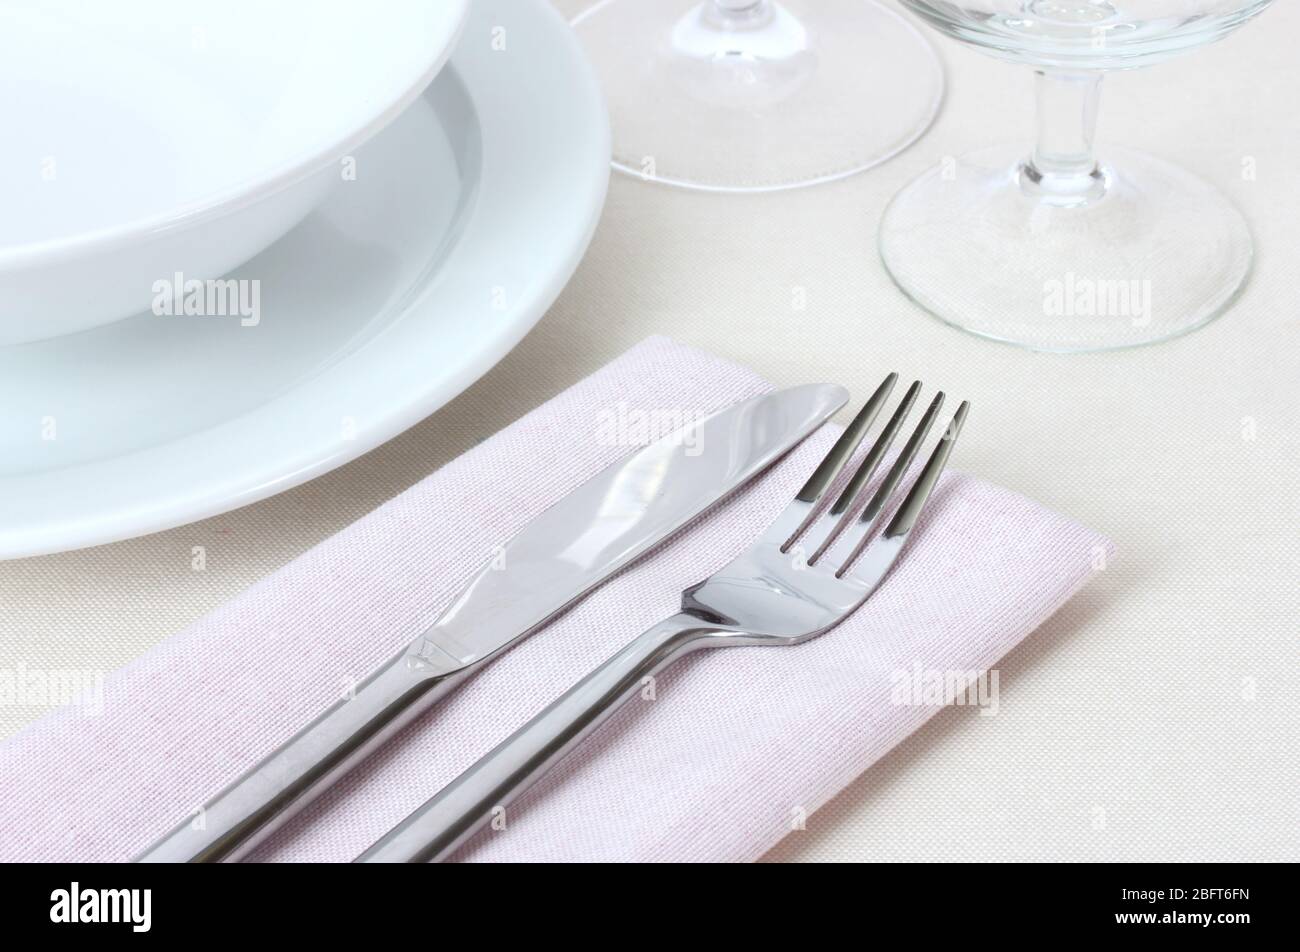 Table setting with fork, knife, plates and napkin Stock Photo - Alamy